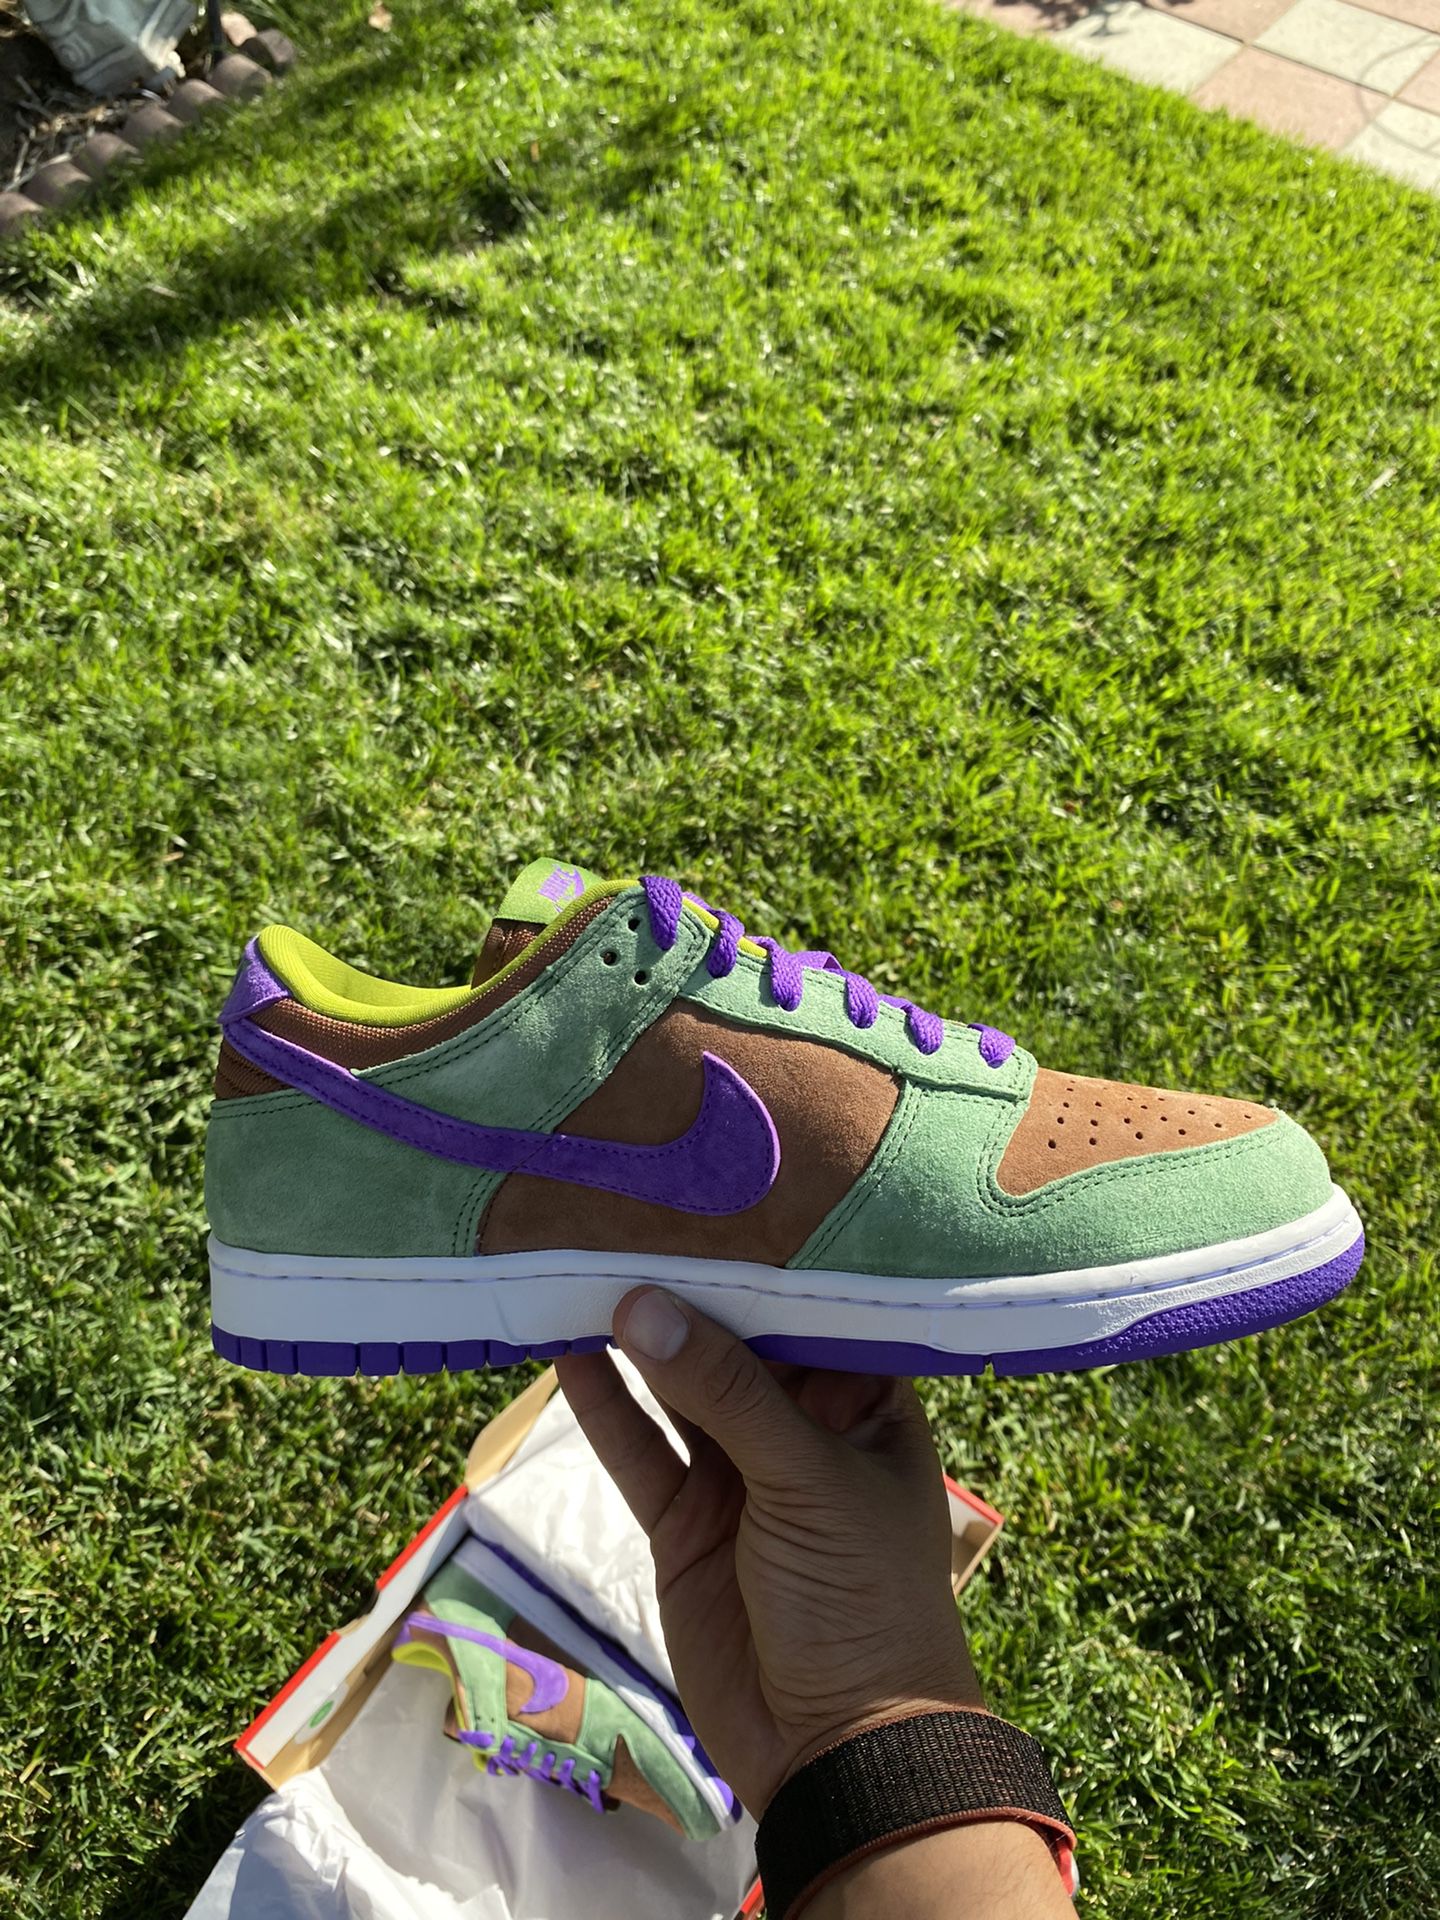 Nike Dunk low SP “Veneer” for Sale in Shafter, CA - OfferUp